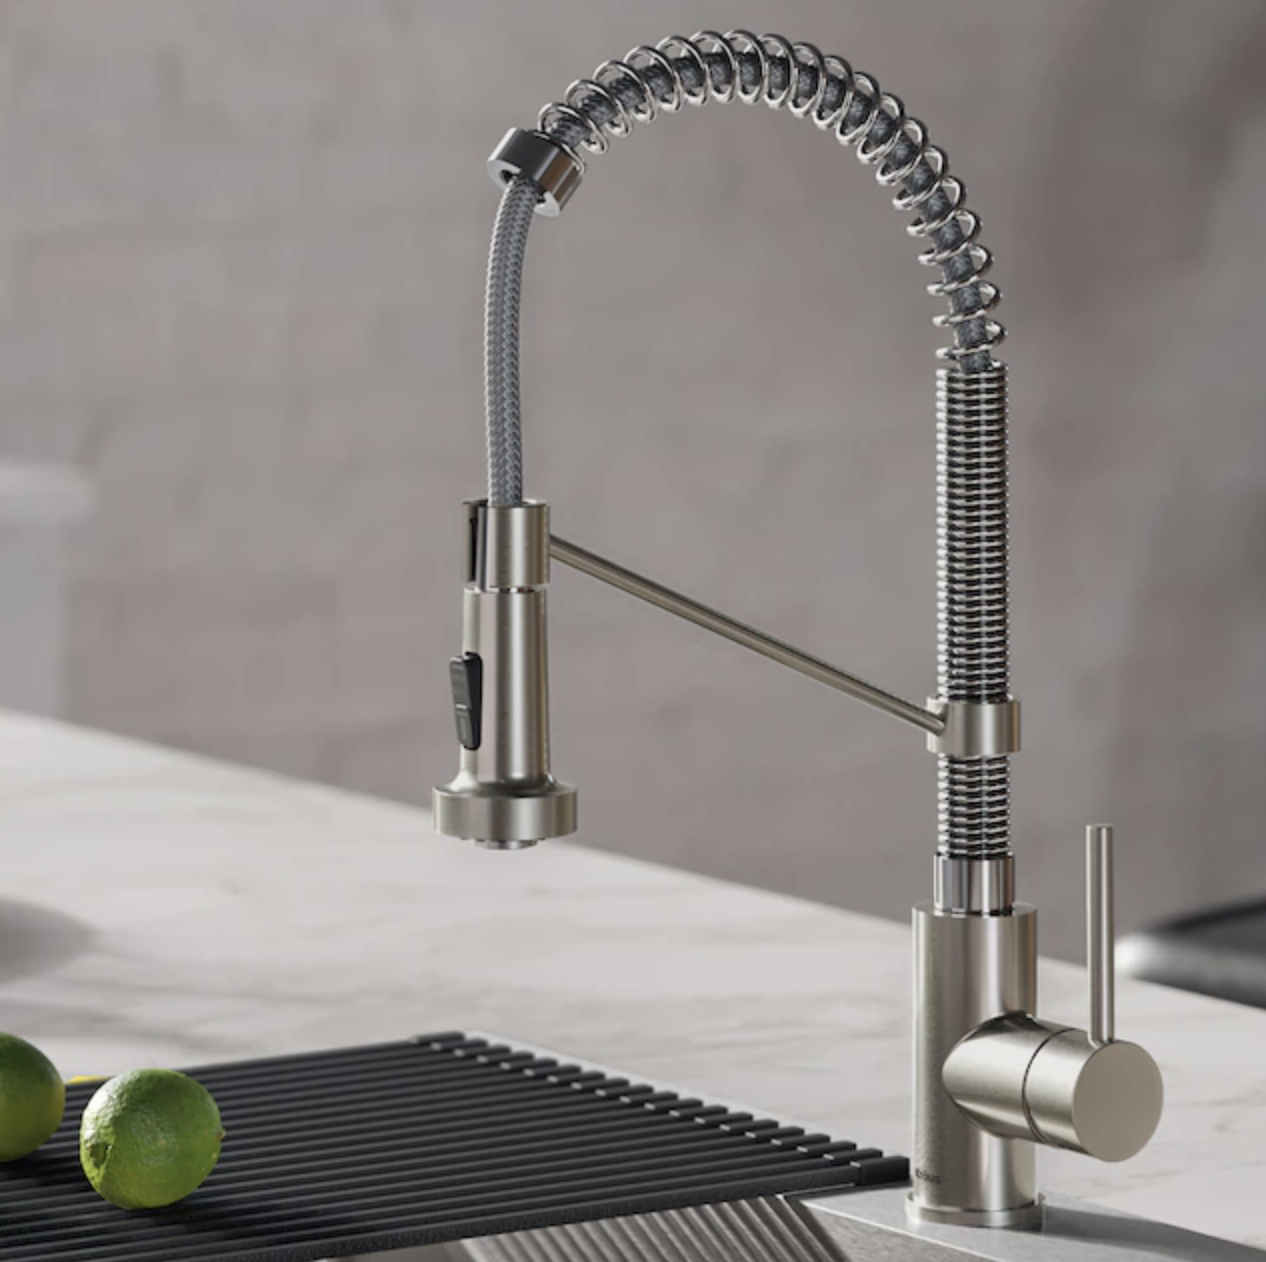 stainless steel/chrome pull-down handle kitchen faucet above sink with fold-over drying rack and limes